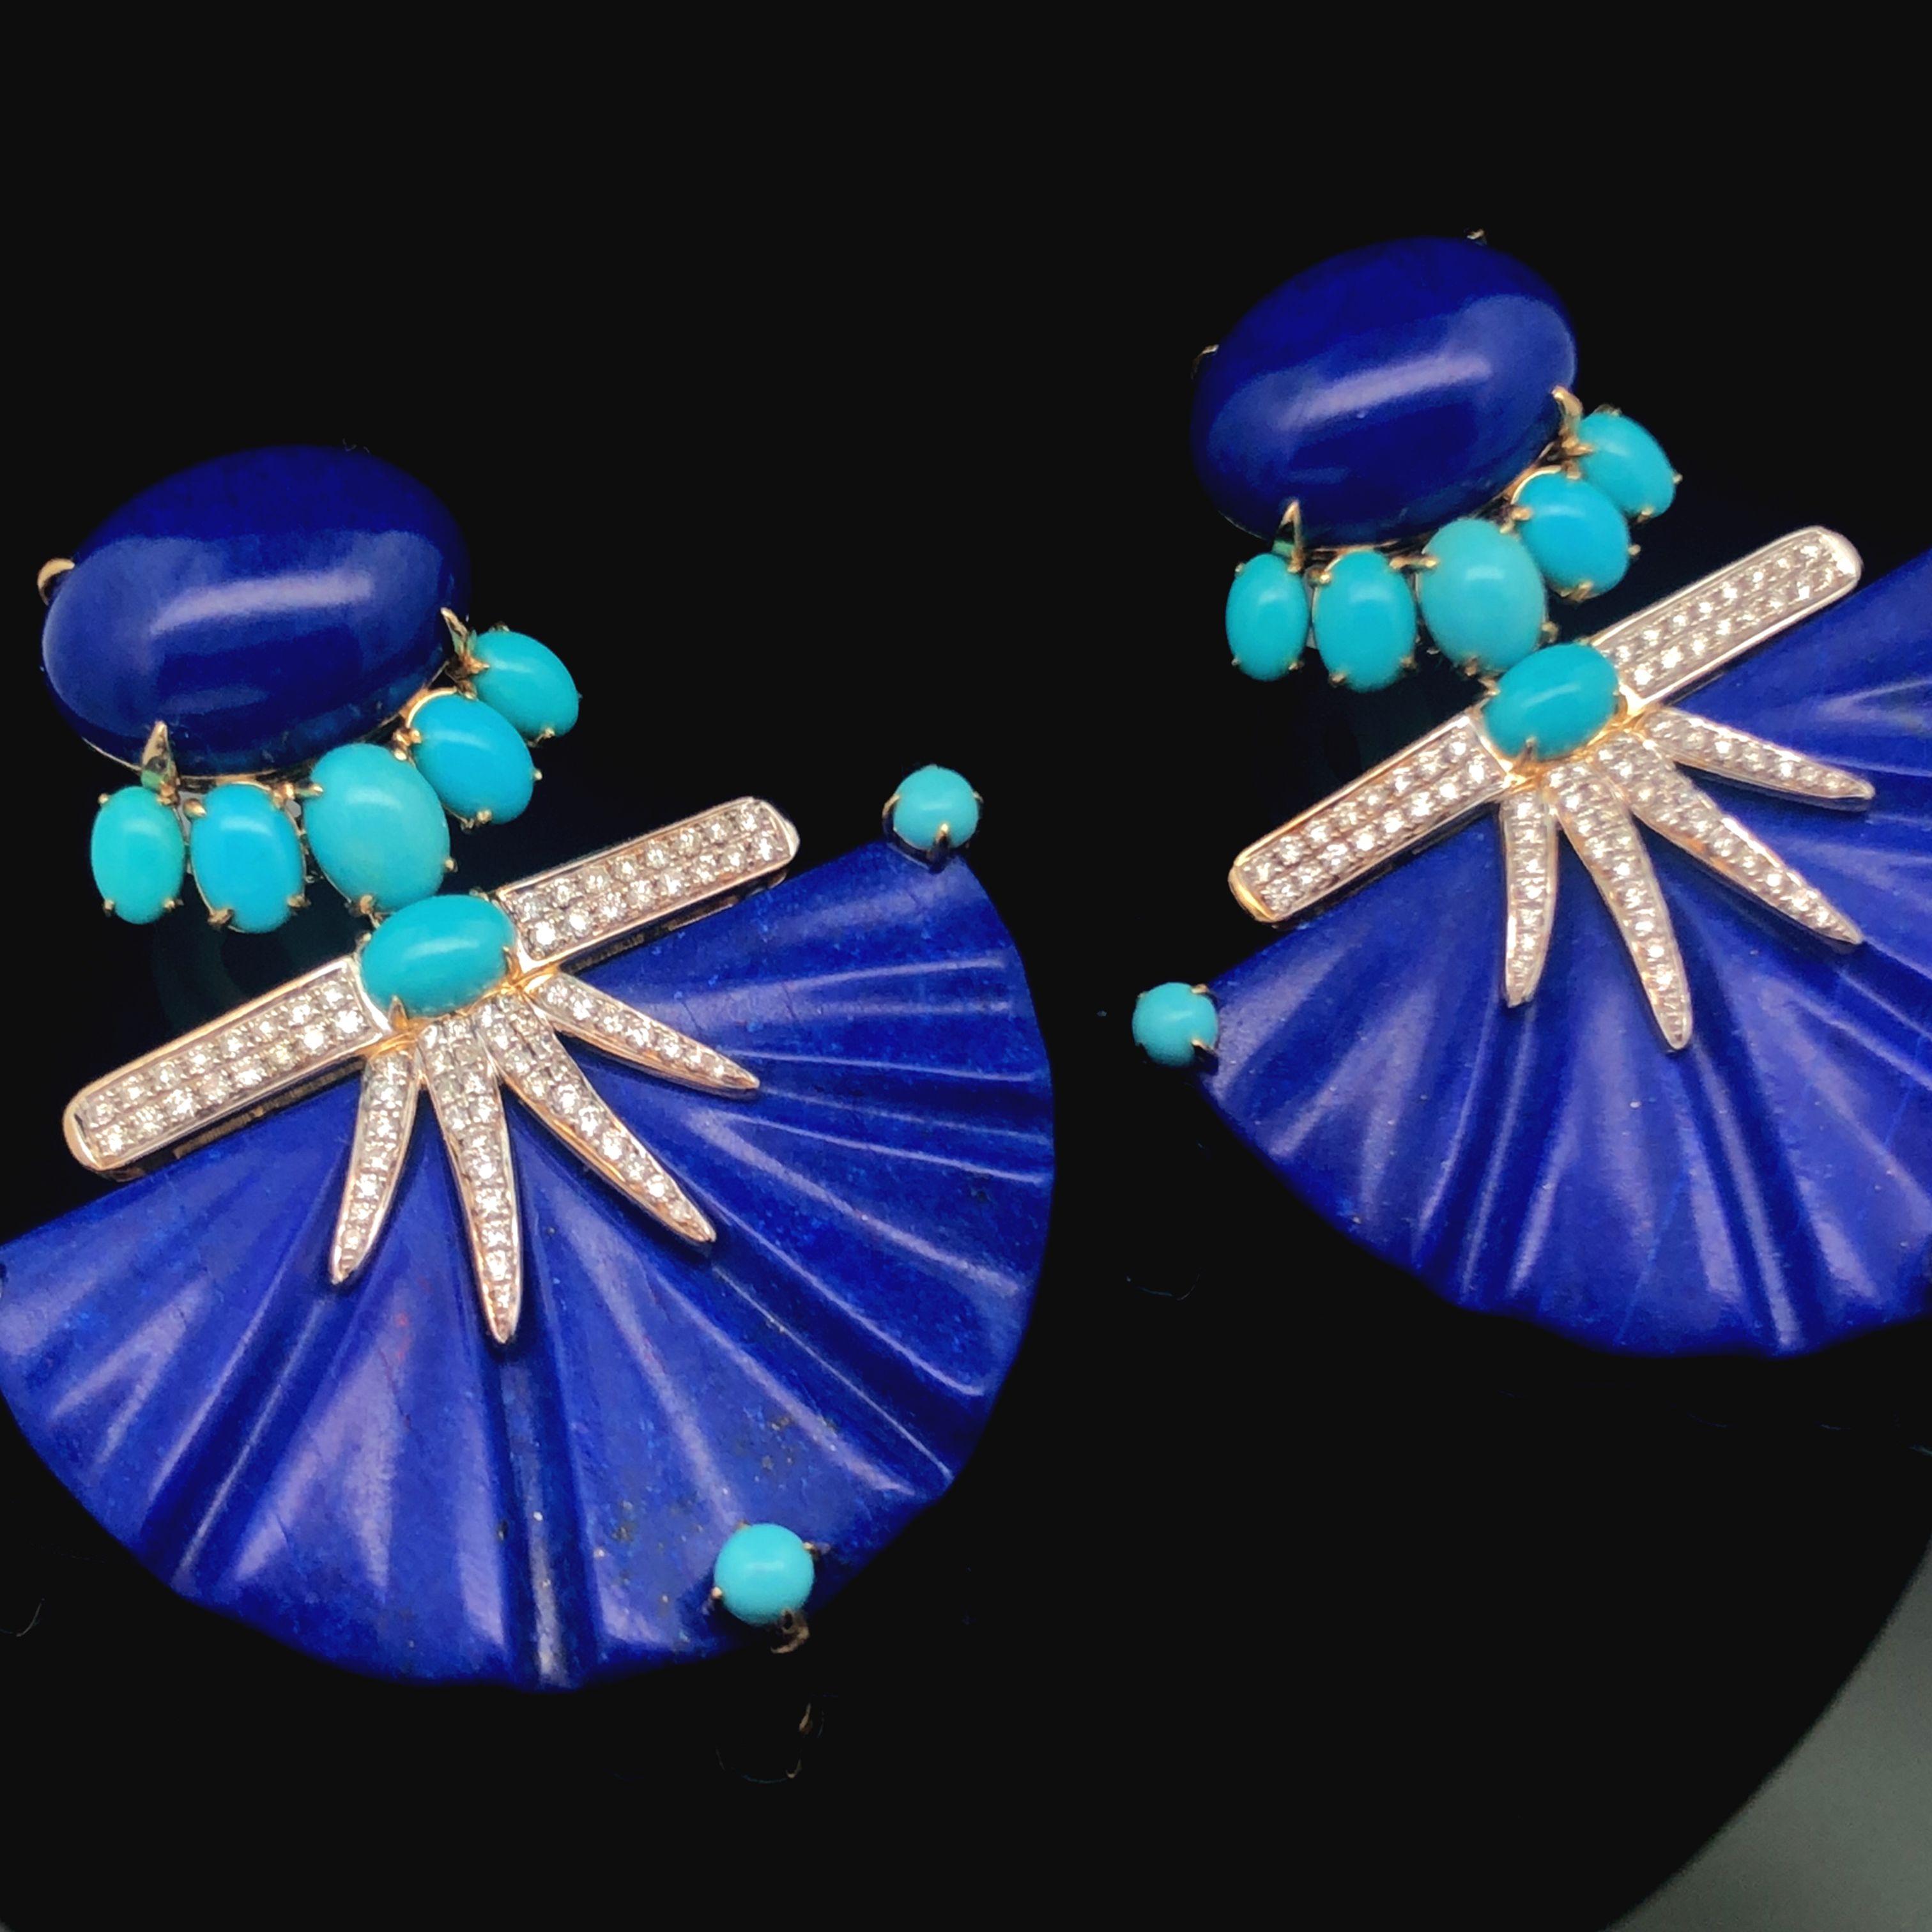 The 18K yellow gold earring features a single cabochon lapis that suspends a ribbed fan-style lapis, accented with cabochon turquoise and diamonds. This intricate design offers a unique and eye-catching aesthetic that is sure to stand out. The